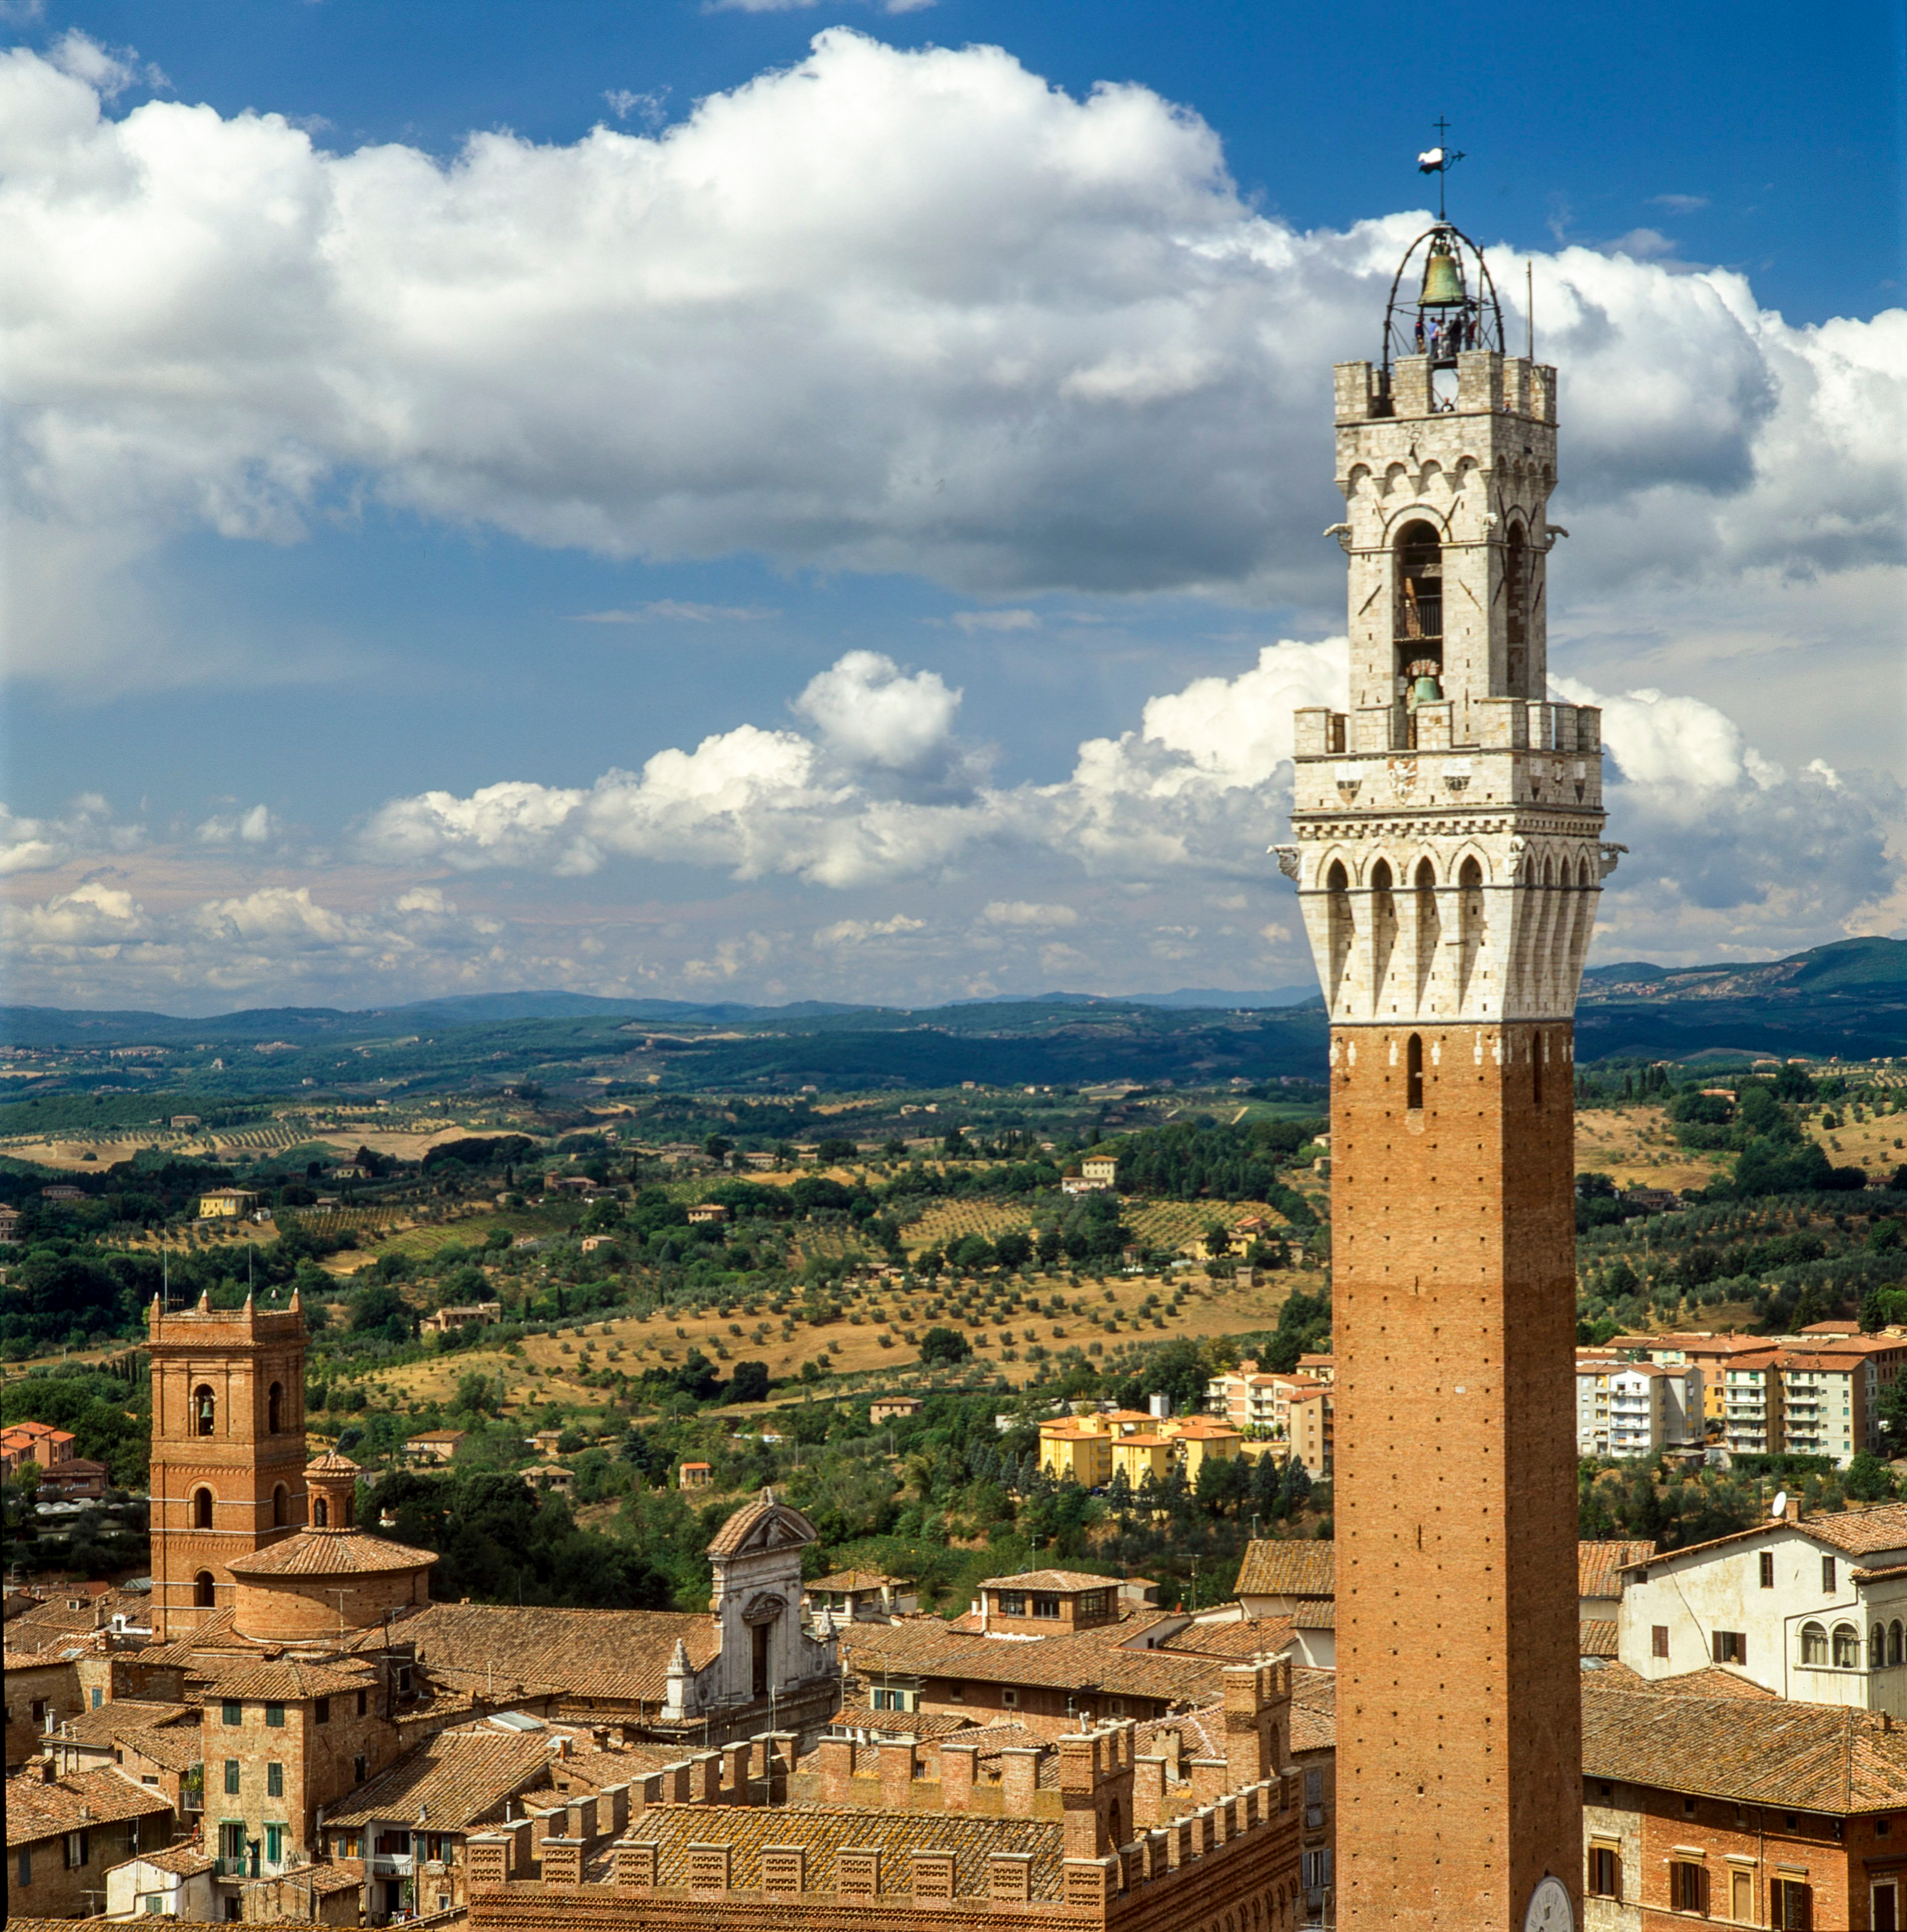 Siena, Tuscany, Italy - Aerial' landscape of the city' center from the top of the Museo dell'Opera del Duomo with Torre Mangia.